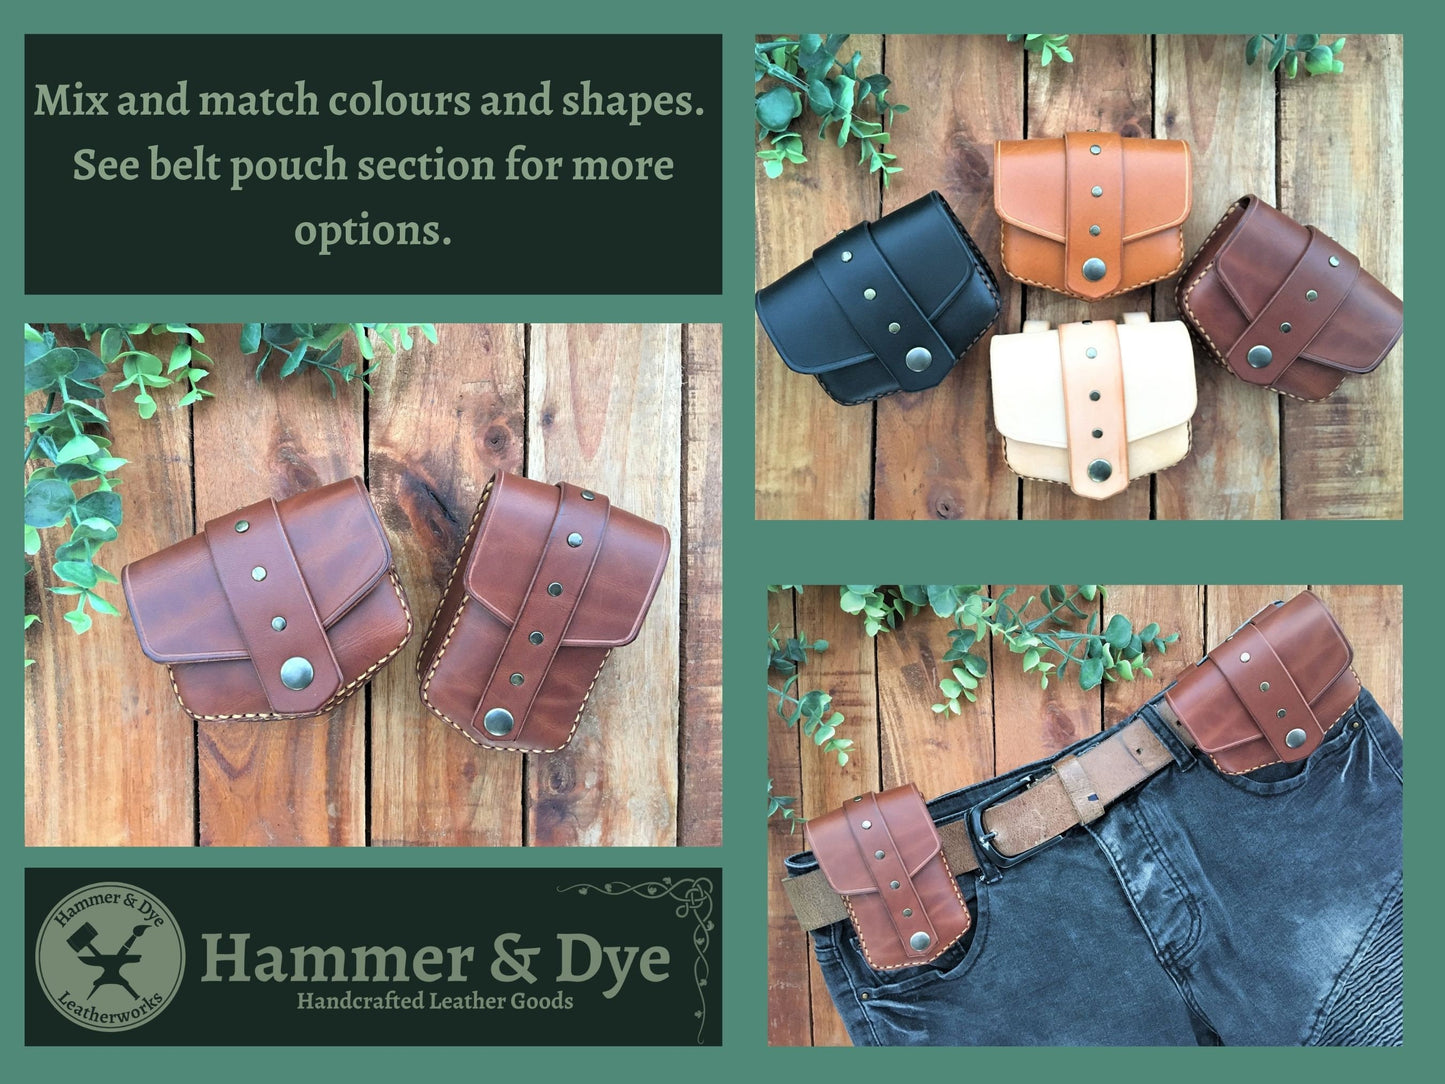 Handmade Mini Leather Belt Pouches available in different shapes and sizes